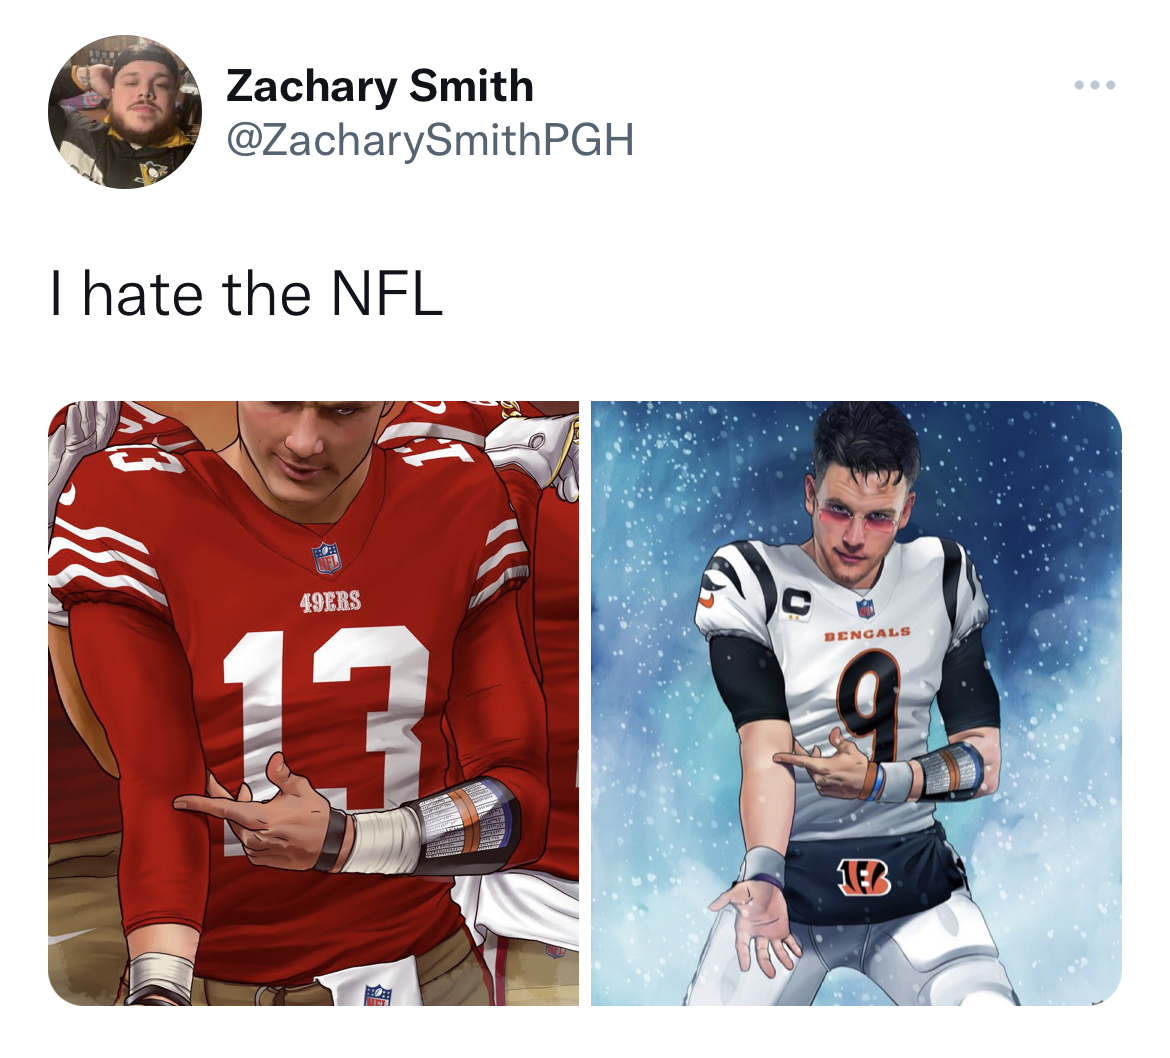 tweets dunking on celebs - t shirt - Zachary Smith I hate the Nfl 49ERS 13 Bengals 1EB